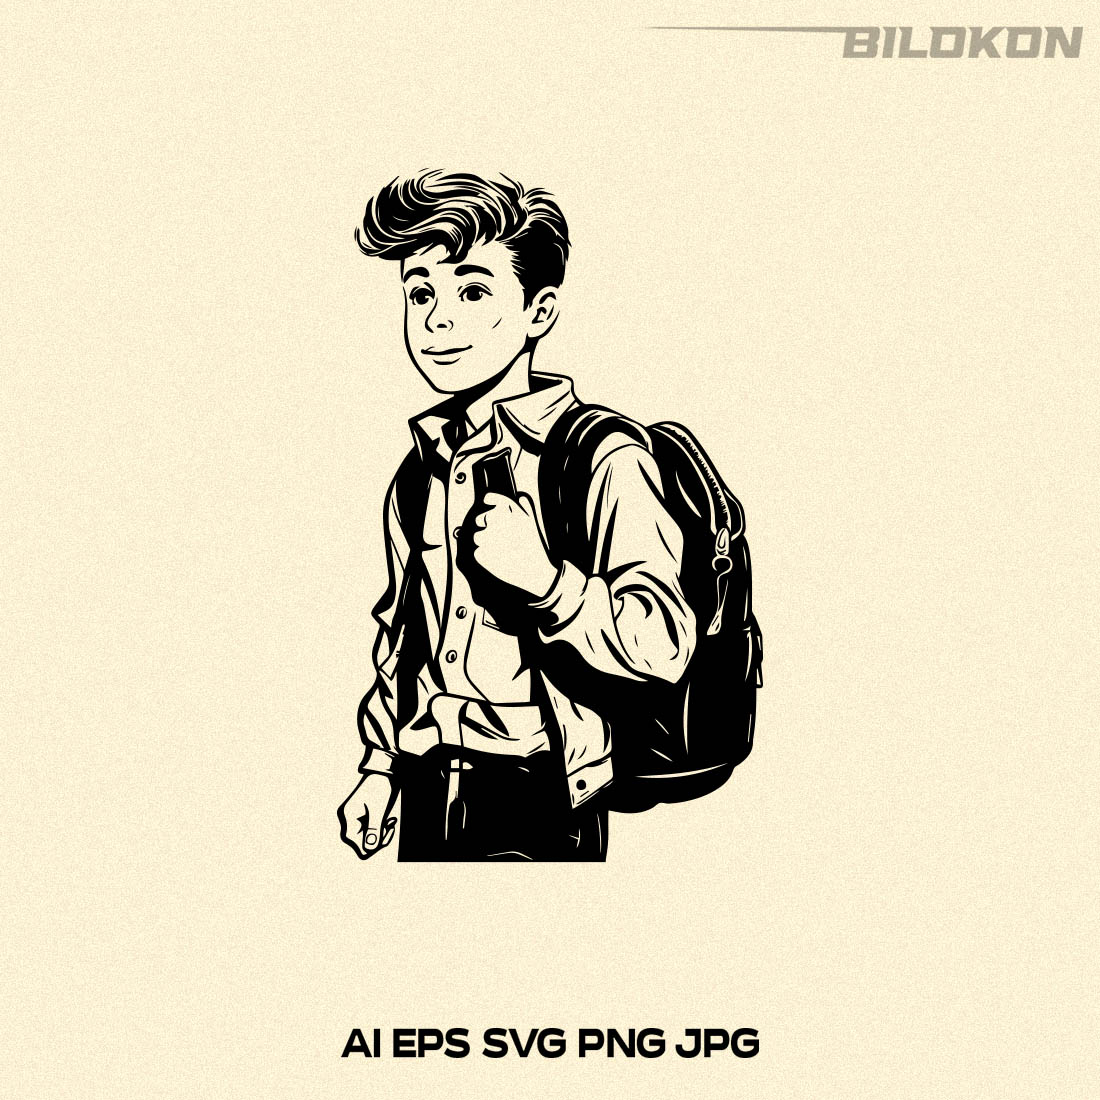 Vintage boy with a backpack goes to school, SVG Vector cover image.